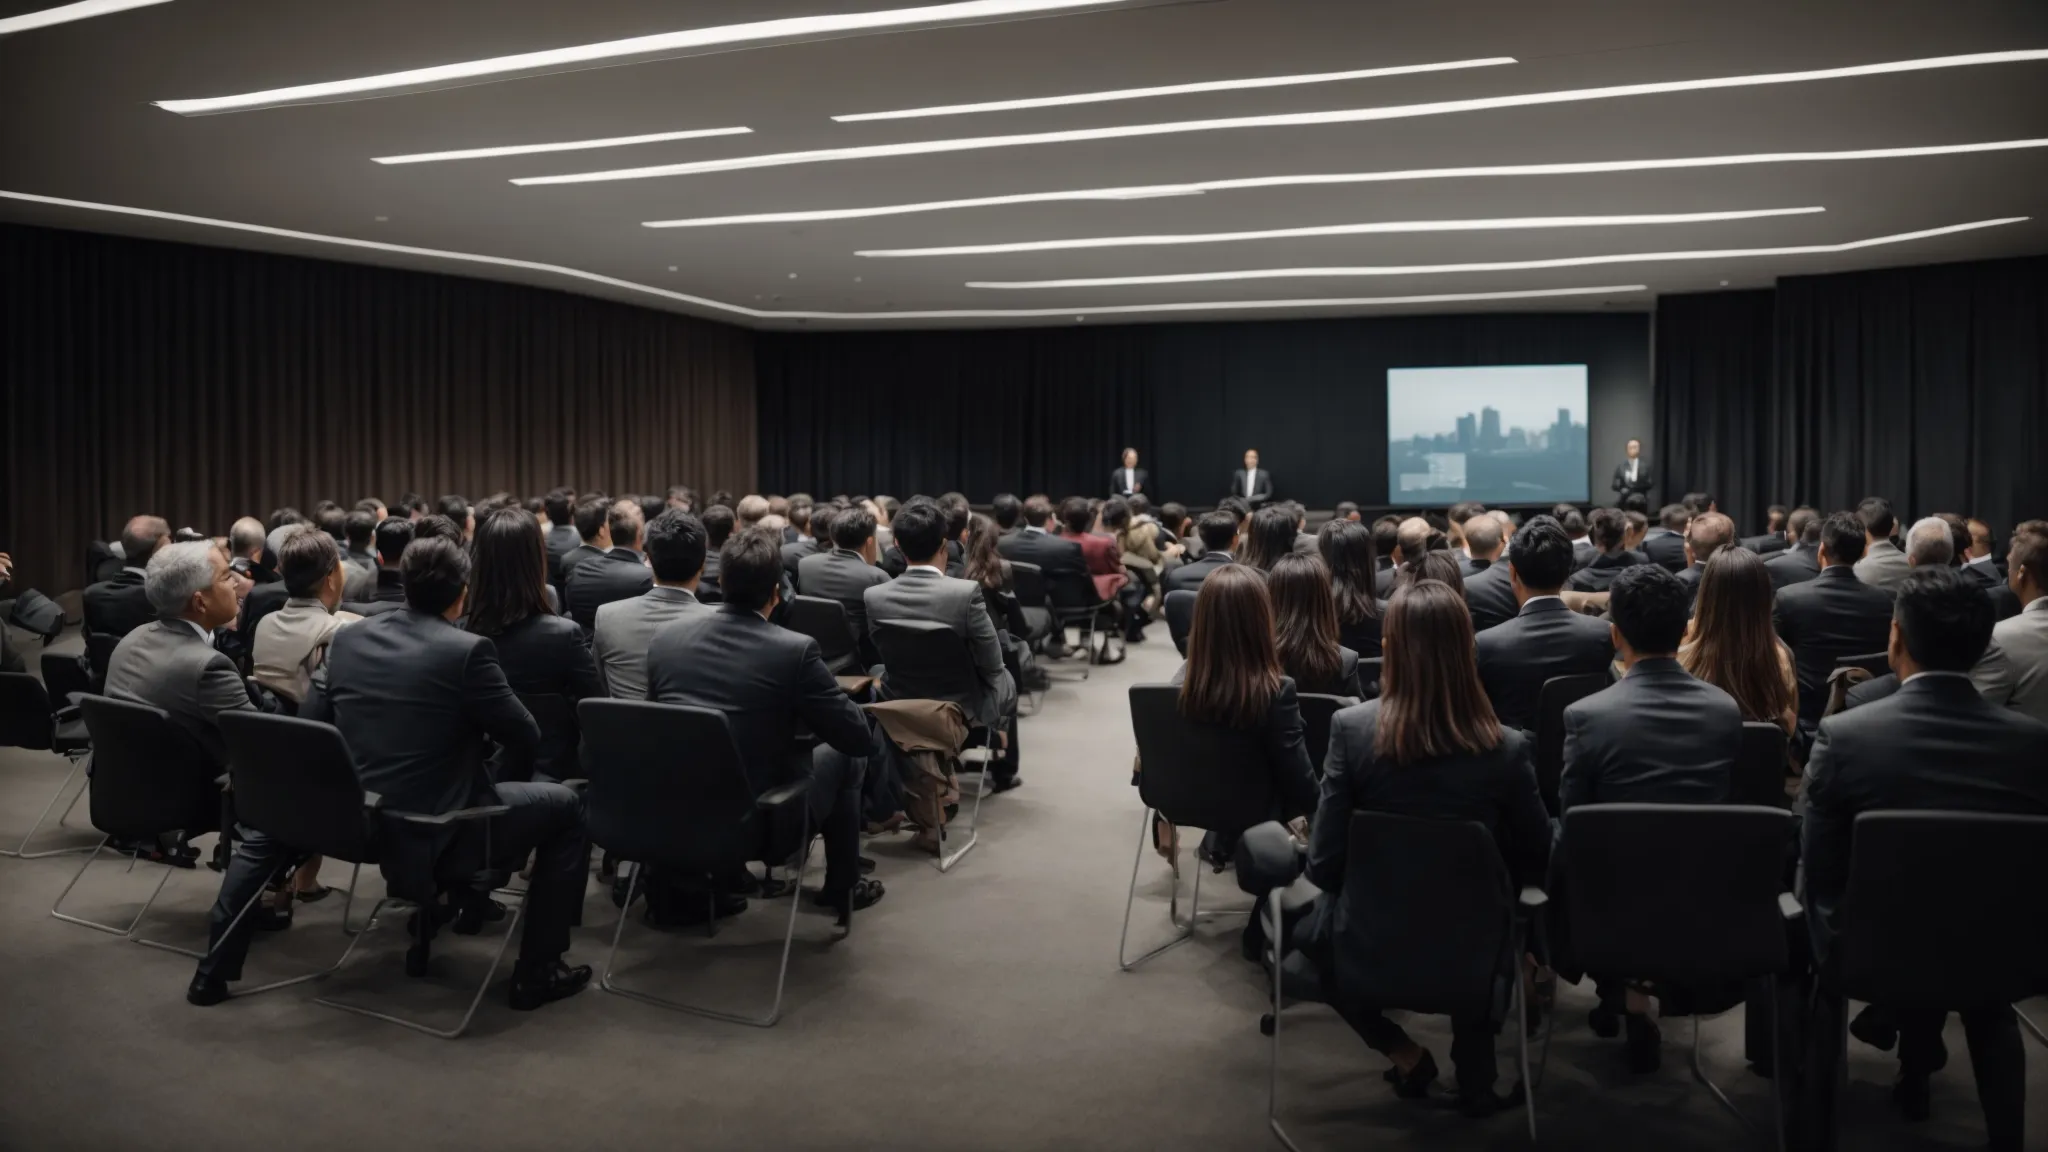 a diverse group of professionals attentively watching a presentation on a large screen in a modern conference room, symbolizing engagement and learning.